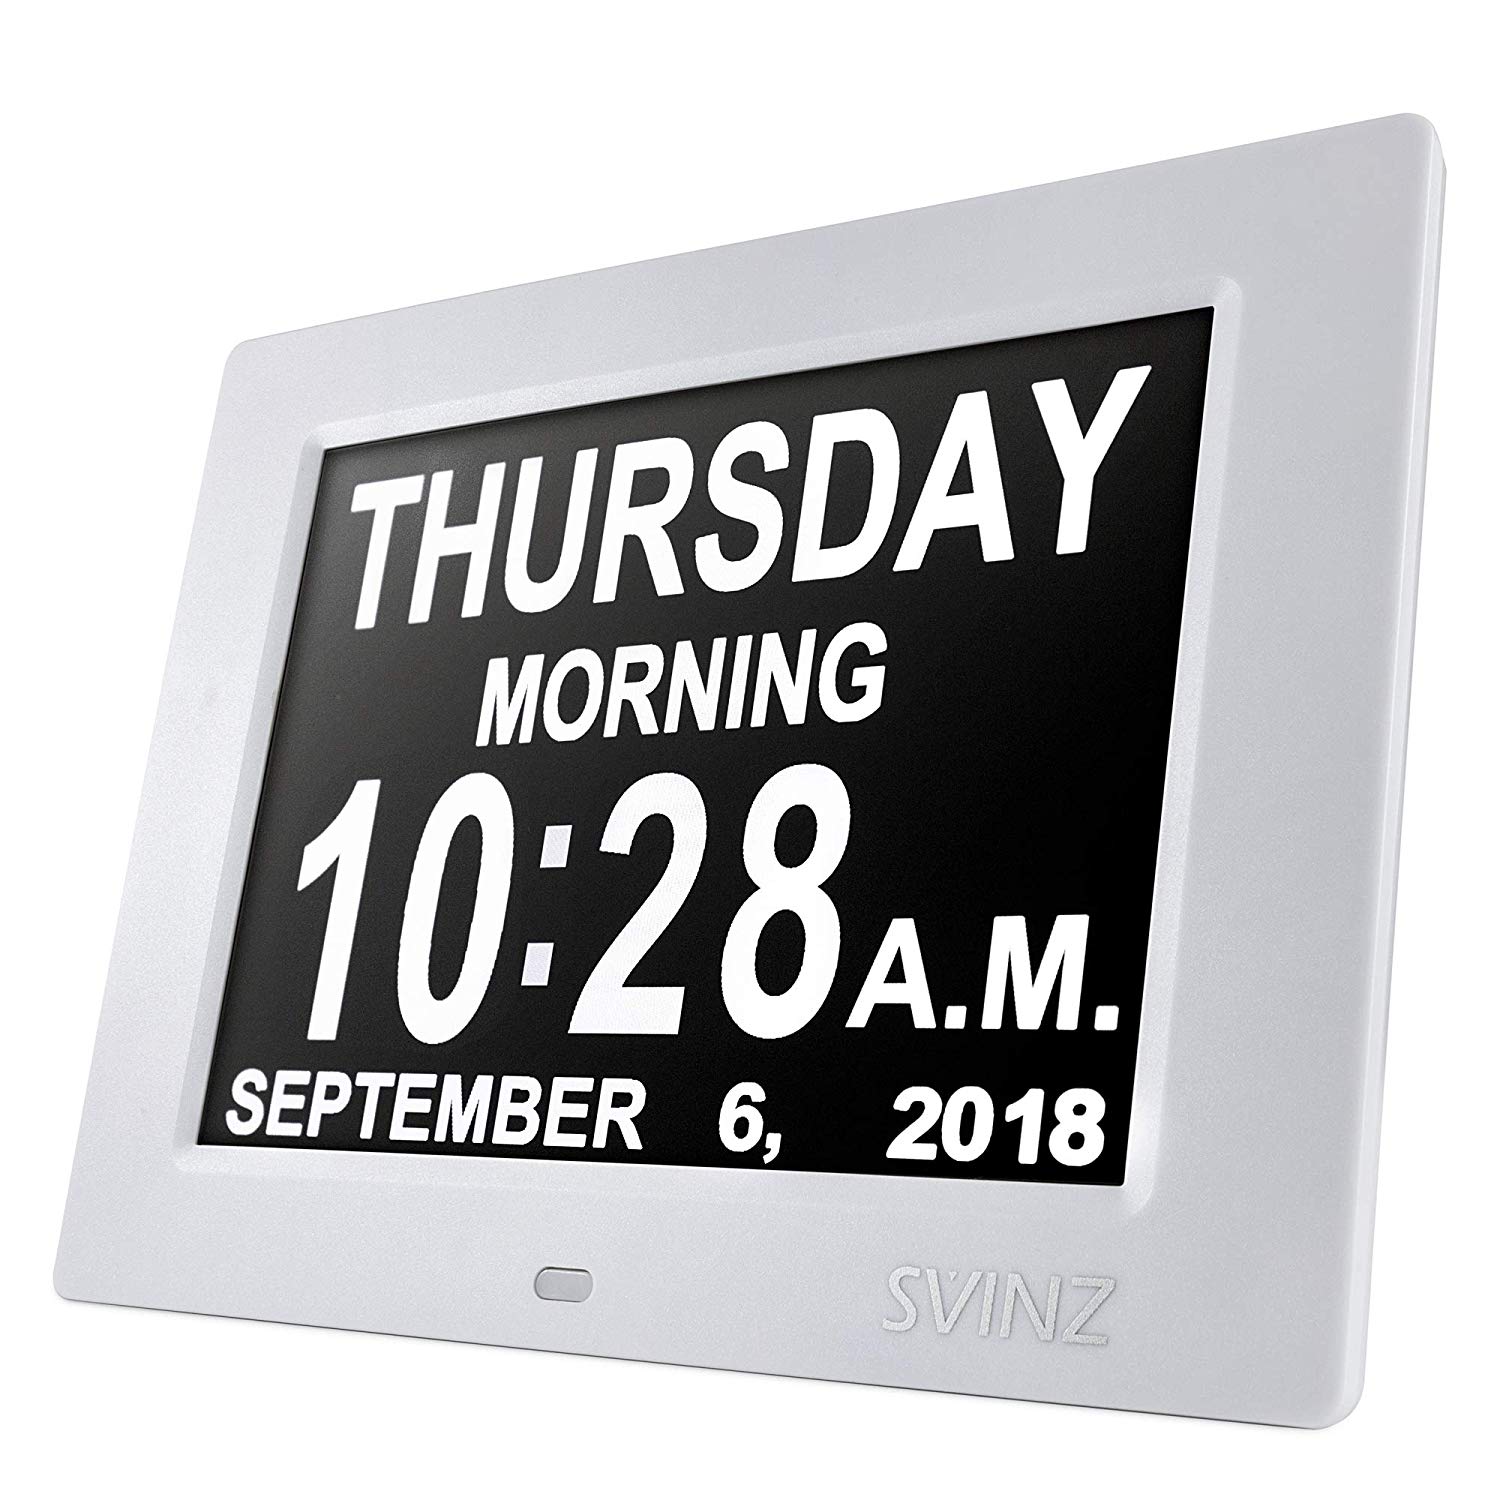 SVINZ 8" Digital Calendar Alarm Day Clock with 3 Alarm Options, Extra Large Non-Abbreviated Day & Month SDC008-2 Color Display Settings